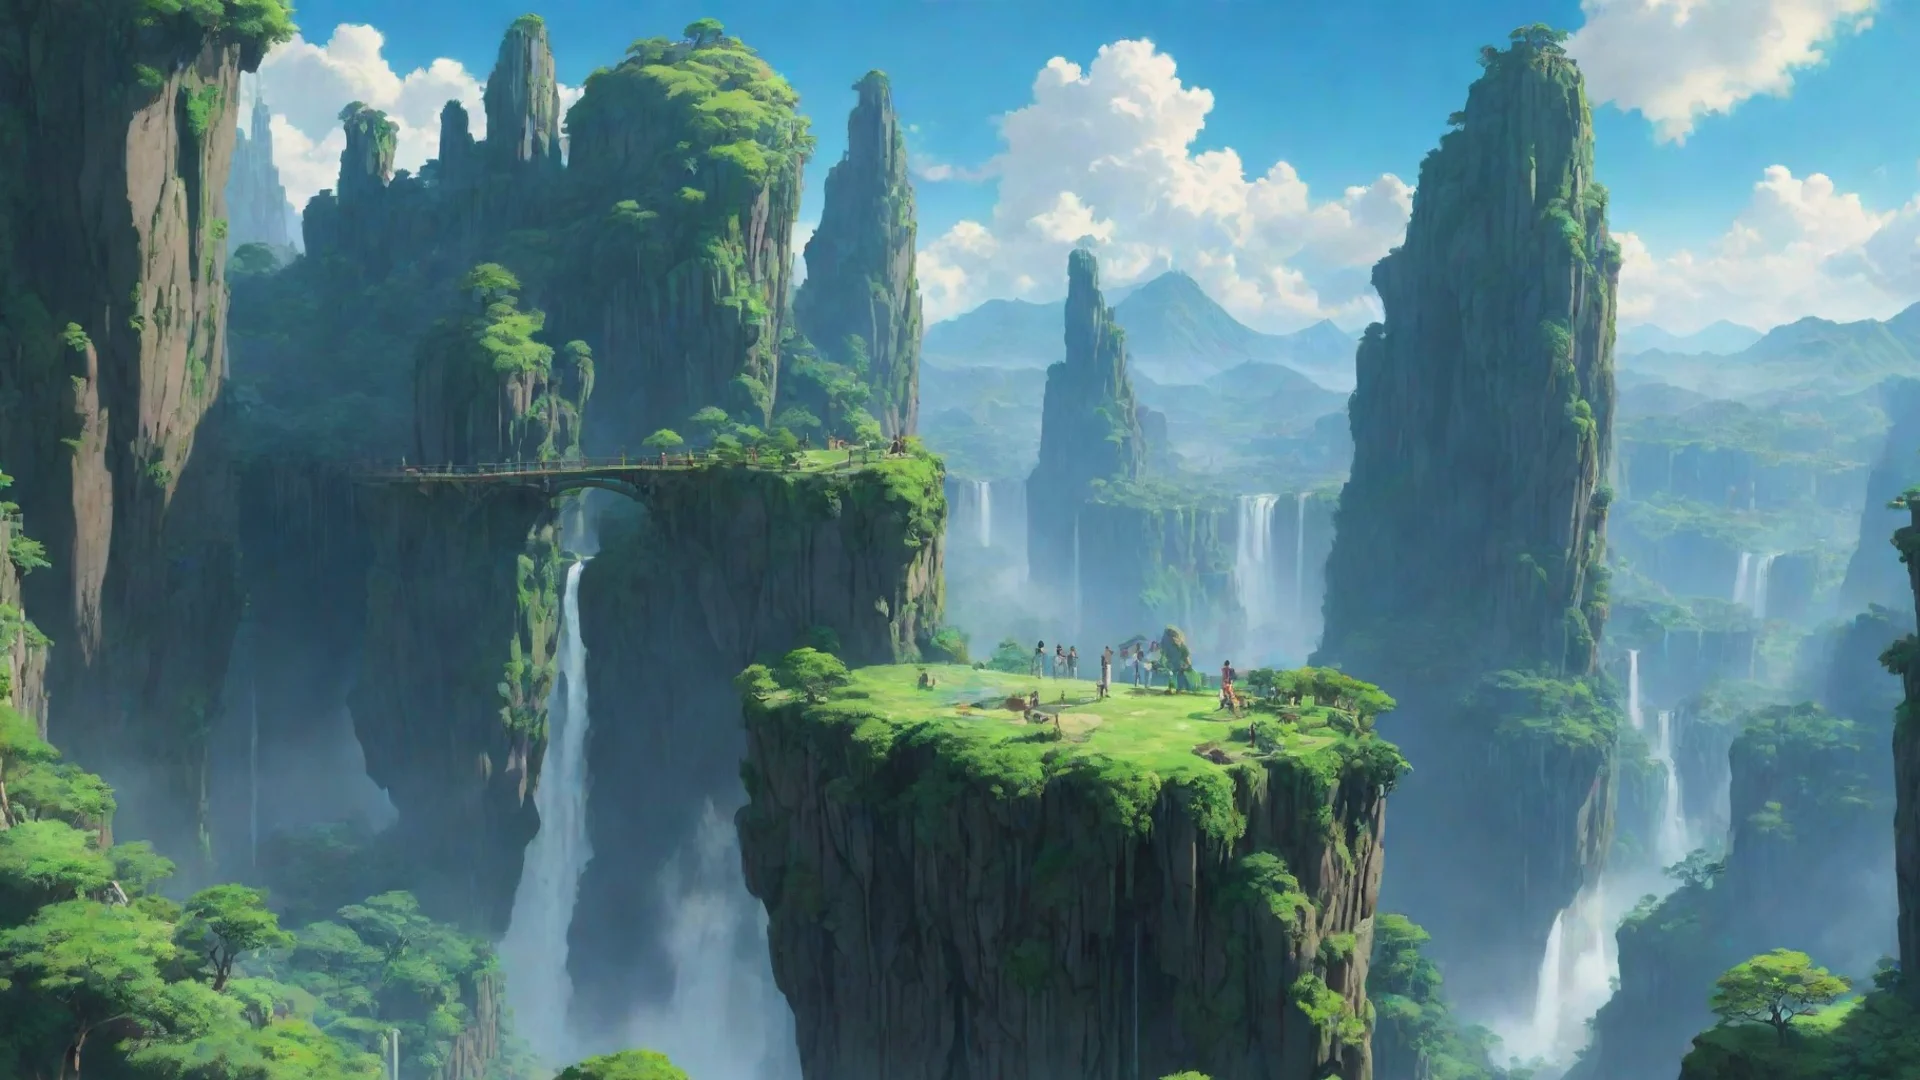 aiamazing giant green planet in sky anime ghibli city on floating cliffs with waterfalls best hd aesthetic wow awesome portrait 2 wide